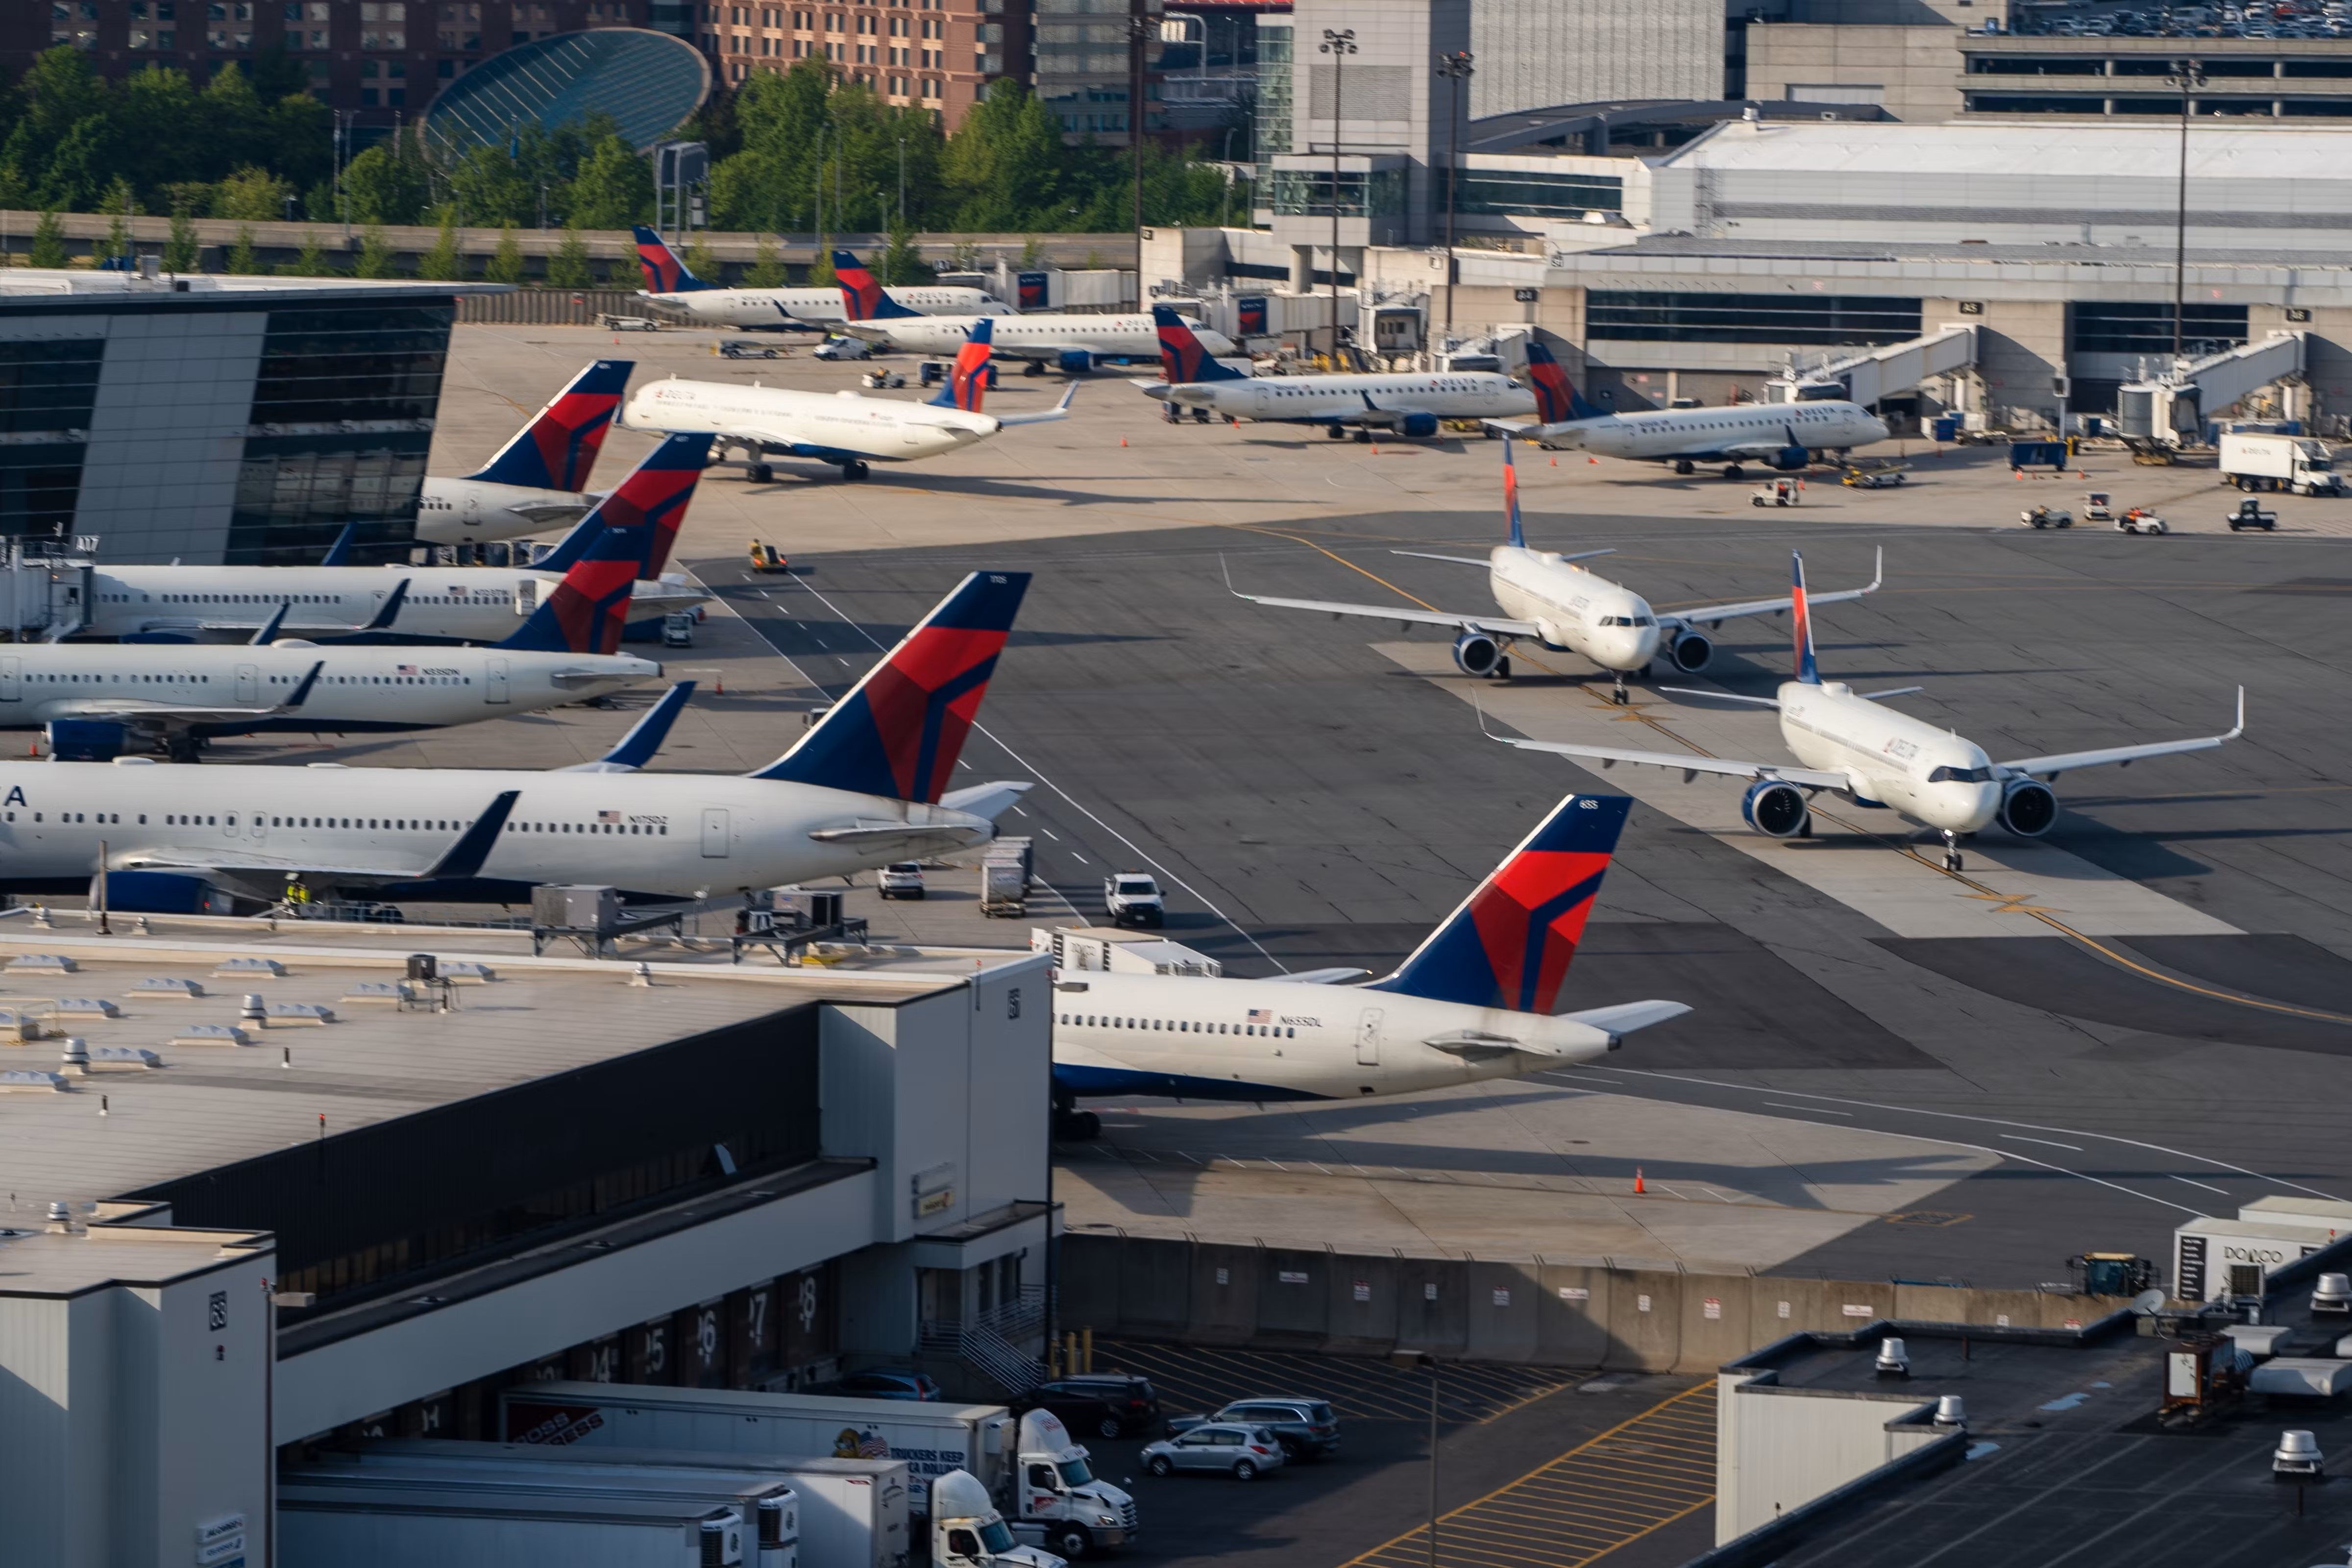 Several Delta Airlines planes stand on the apron of Boston Logan Airport.